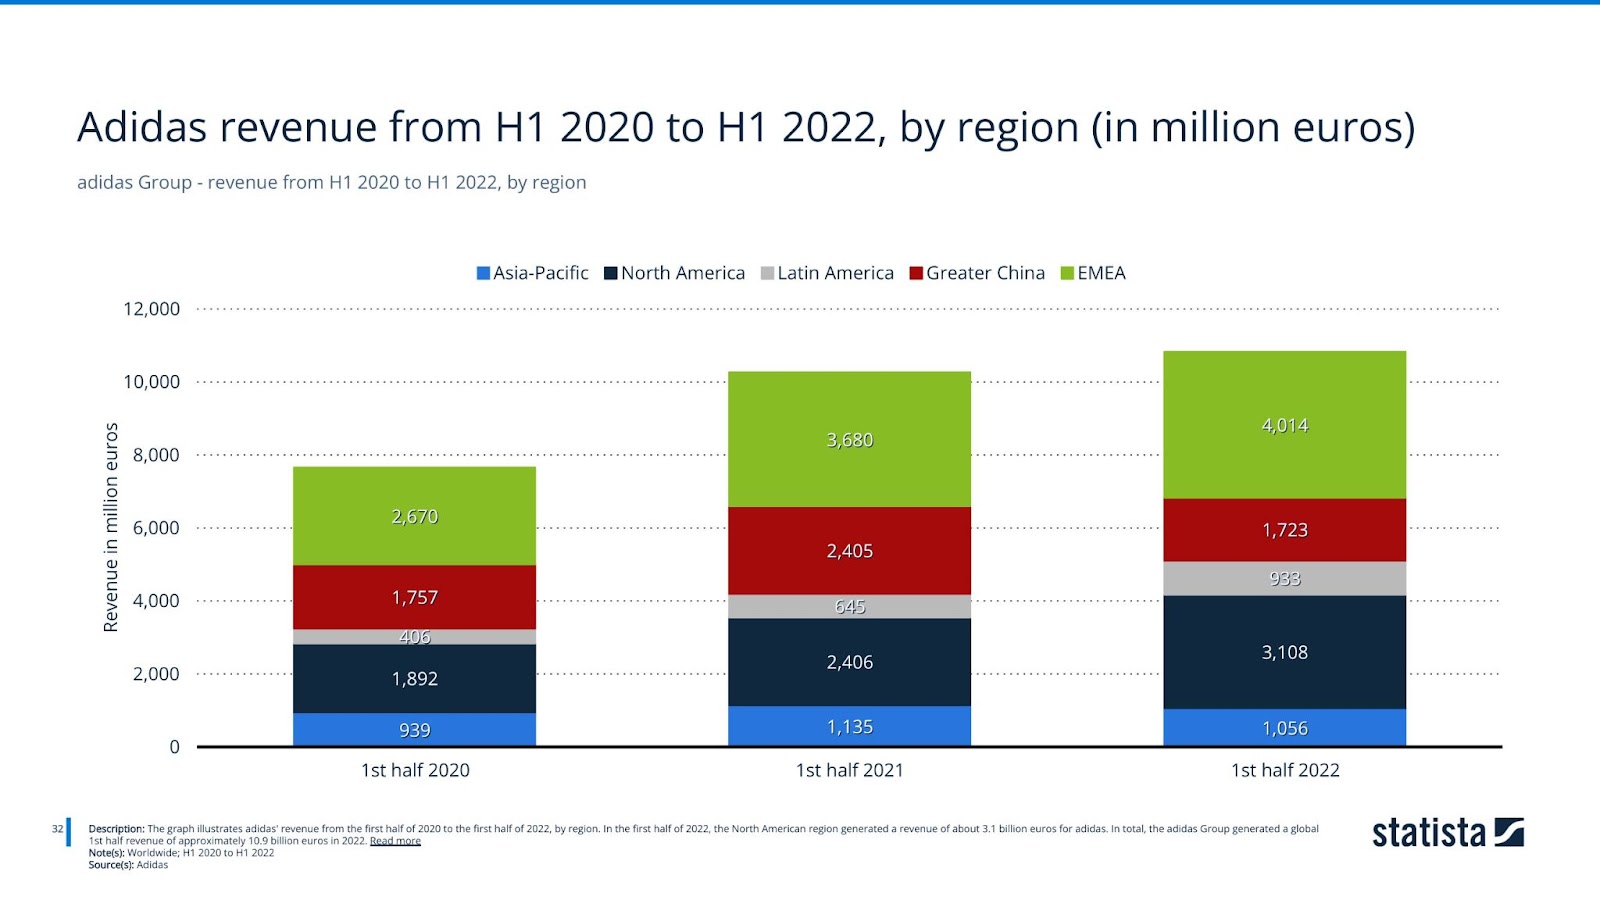 adidas Group - revenue from H1 2020 to H1 2022, by region